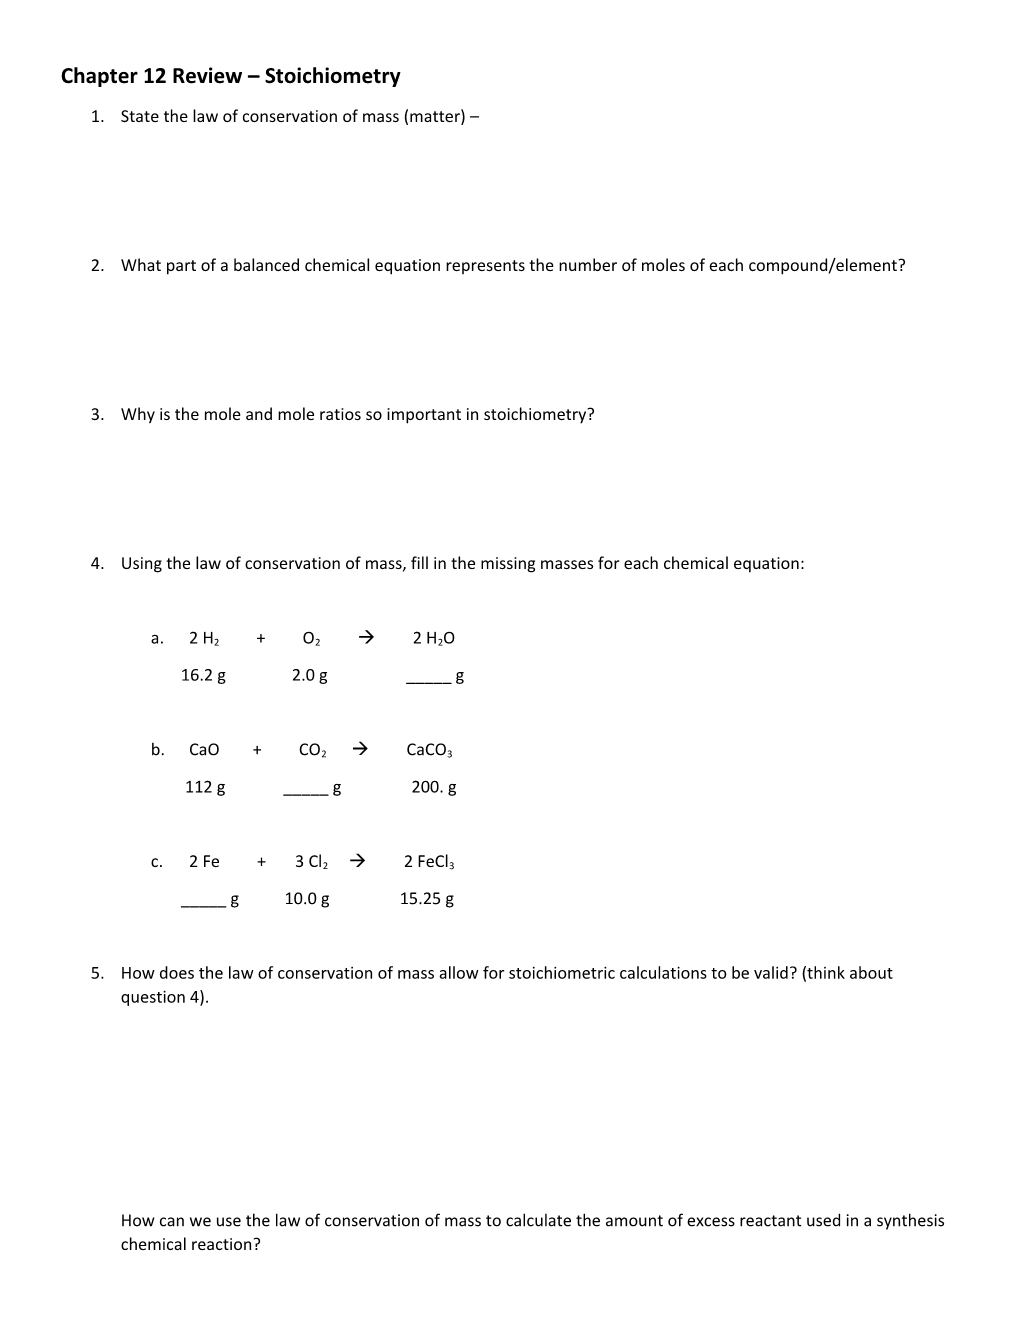 Chapter 12 Review Stoichiometry